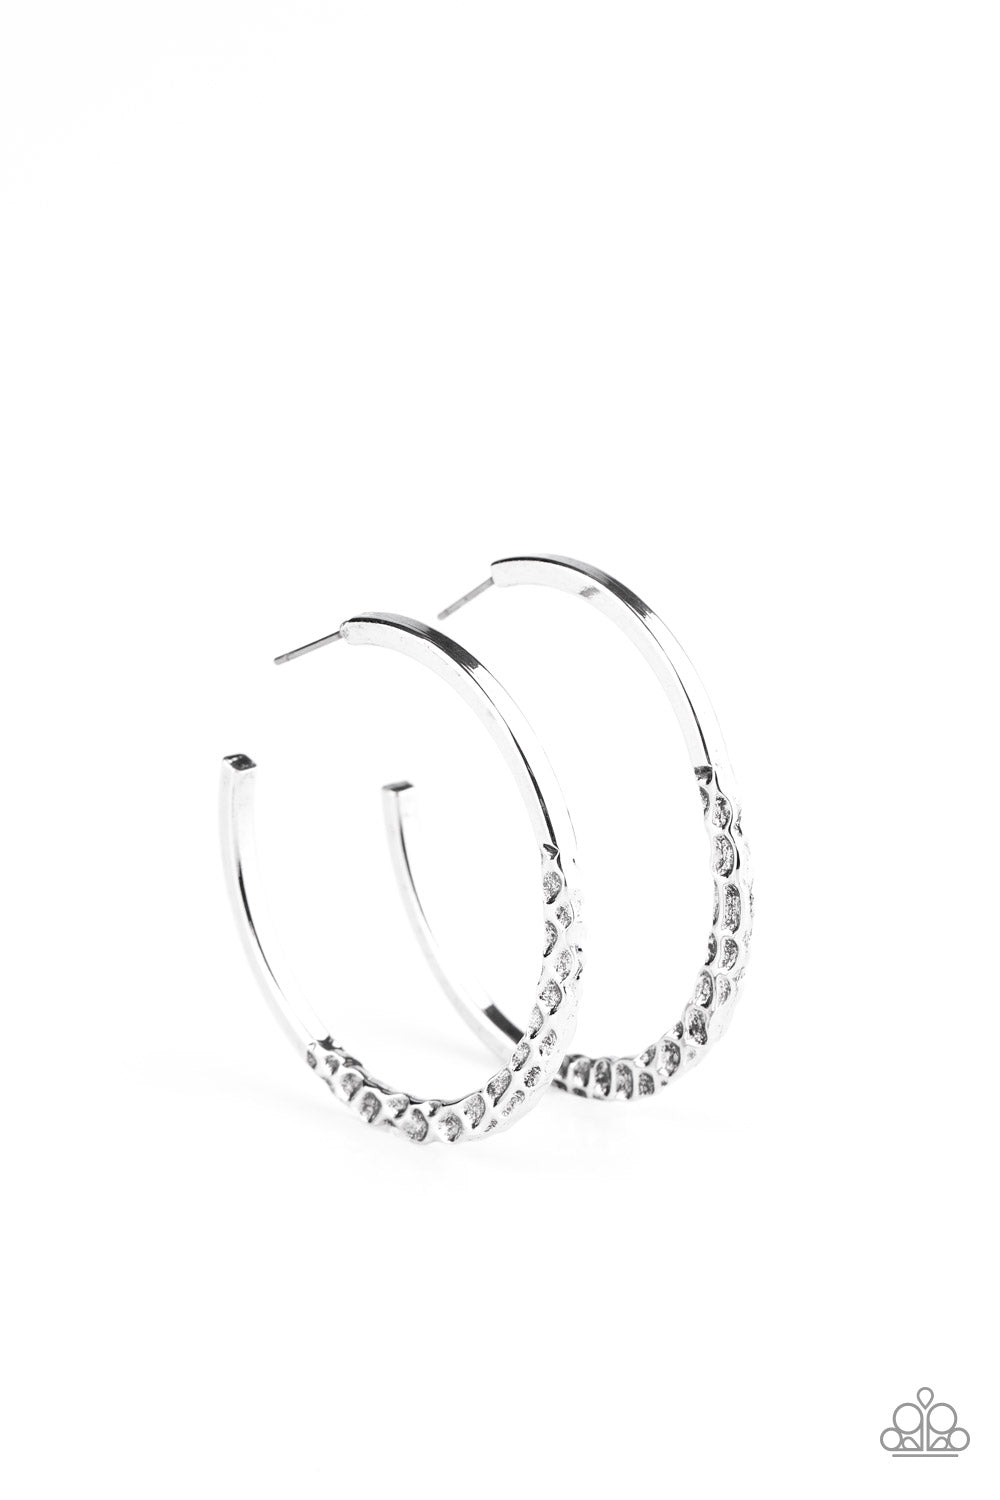 Paparazzi Accessories - Imprinted Intensity - Silver Earrings - Alies Bling Bar